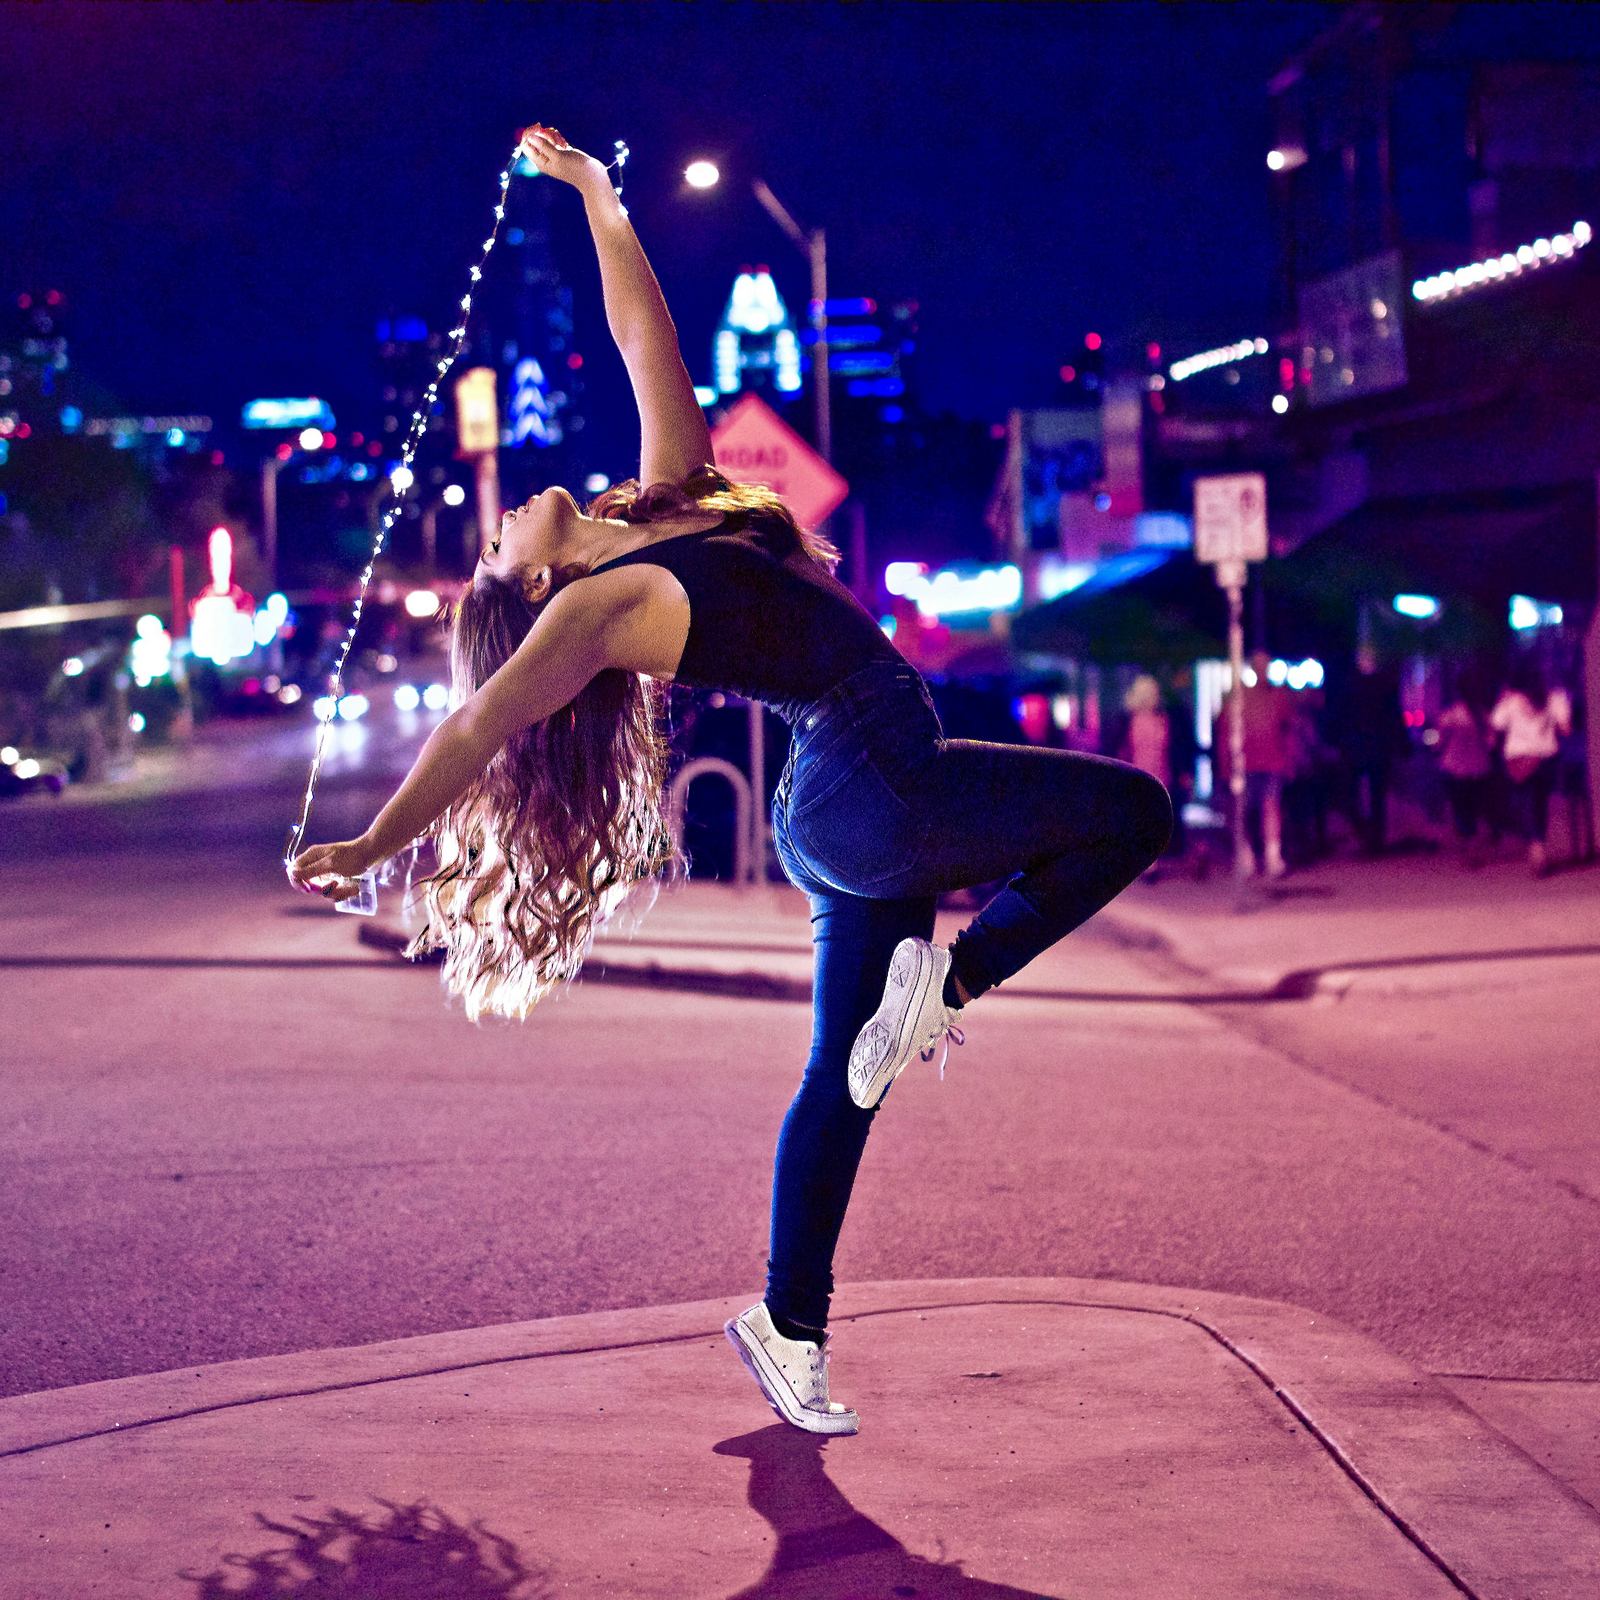 Woman dancing on the street at night